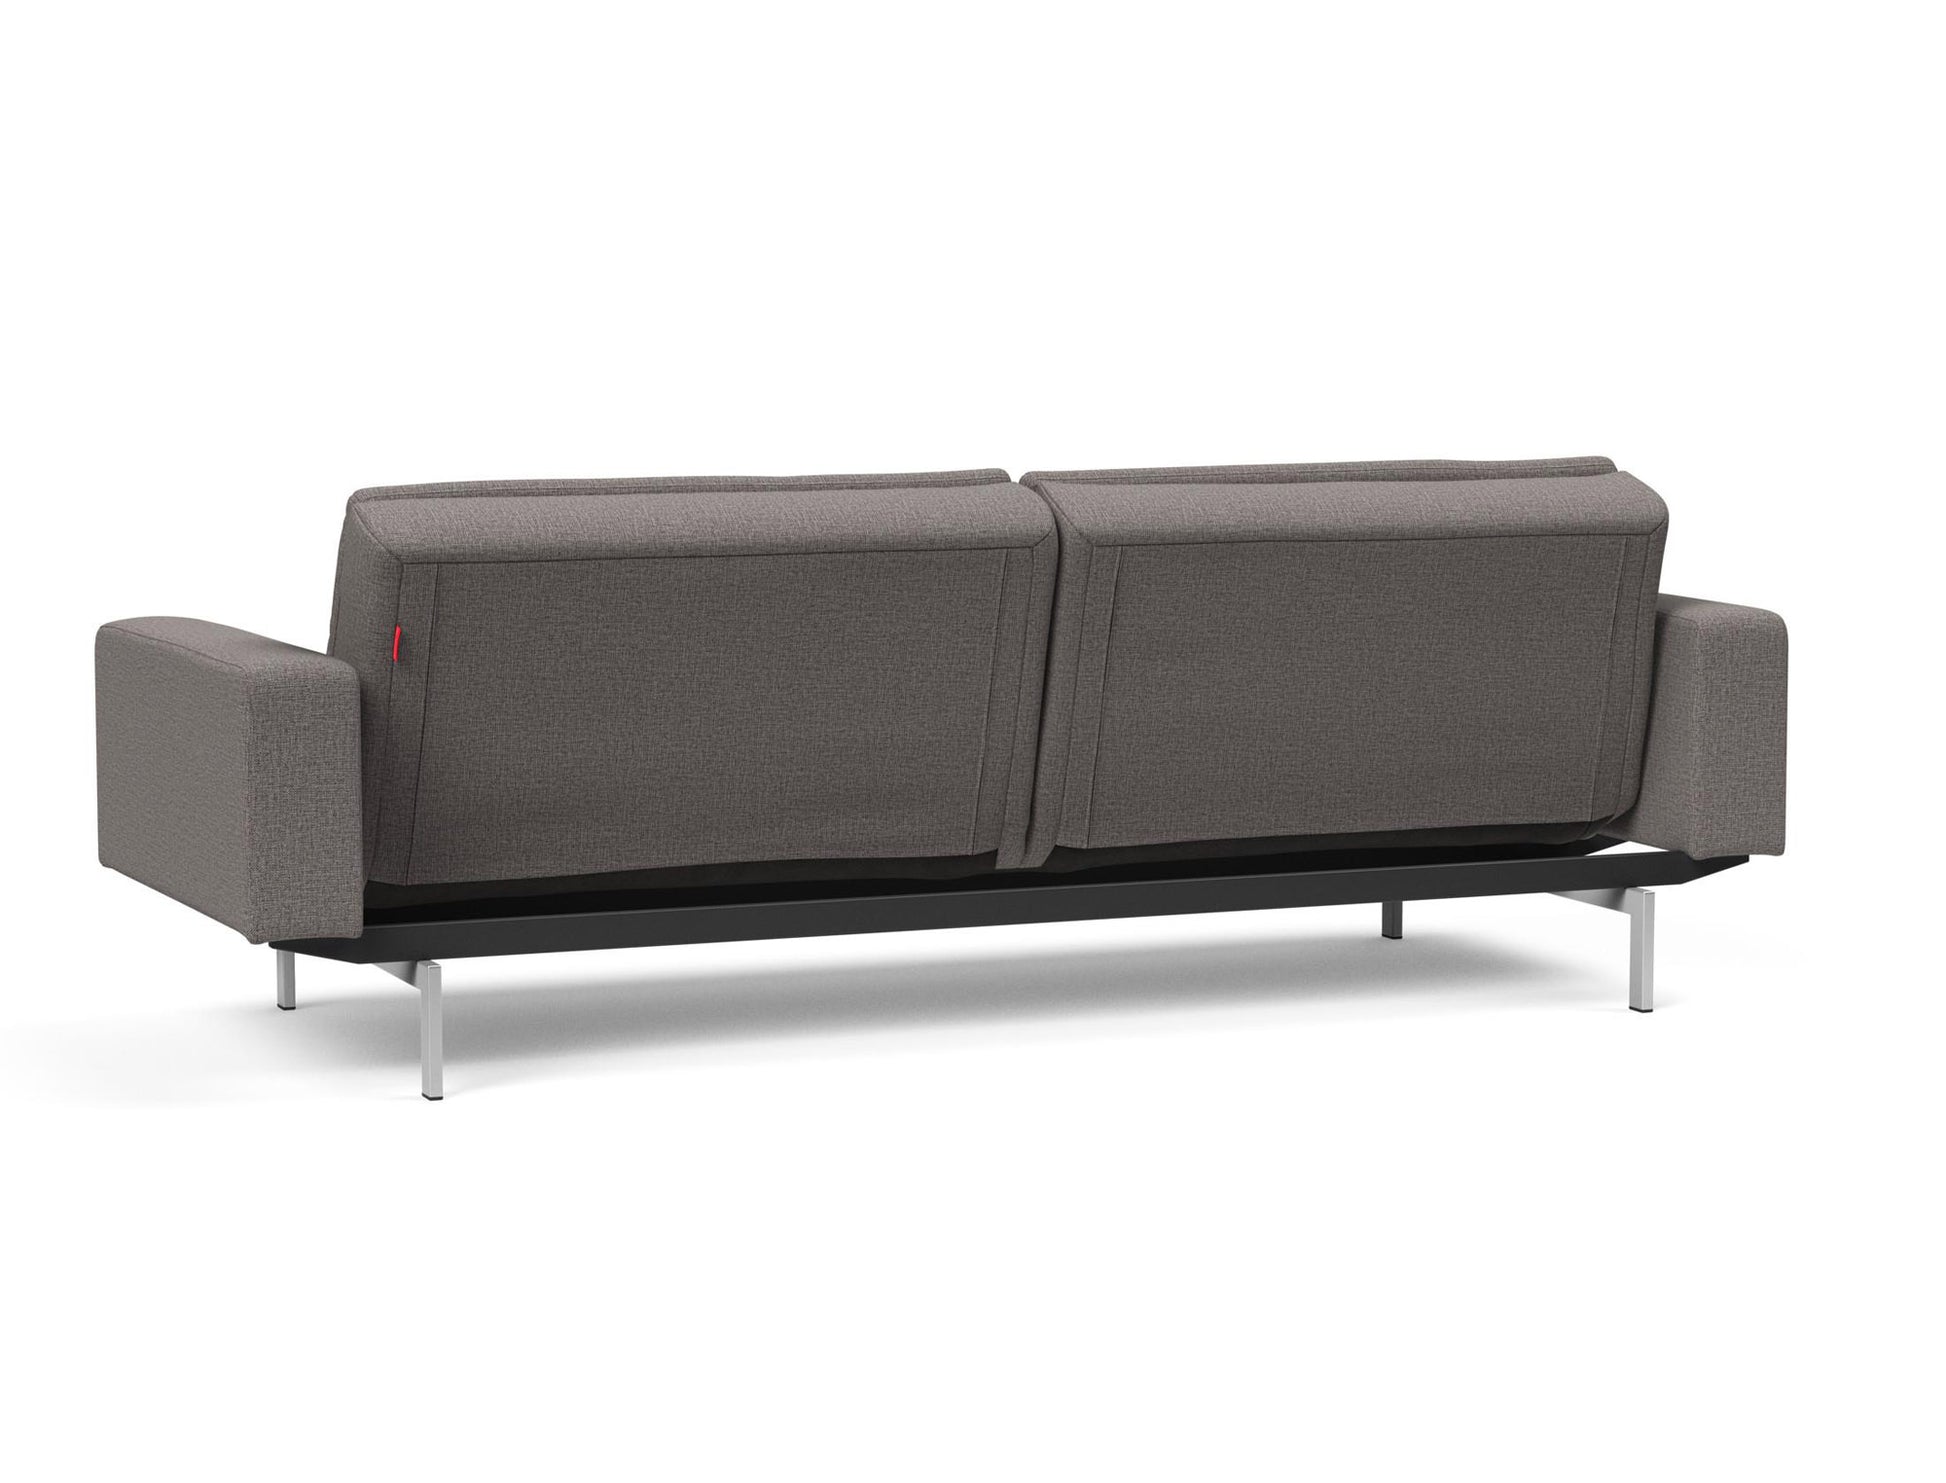 Innovation Living Dublexo Sofa Bed Stainless Steel With Arms